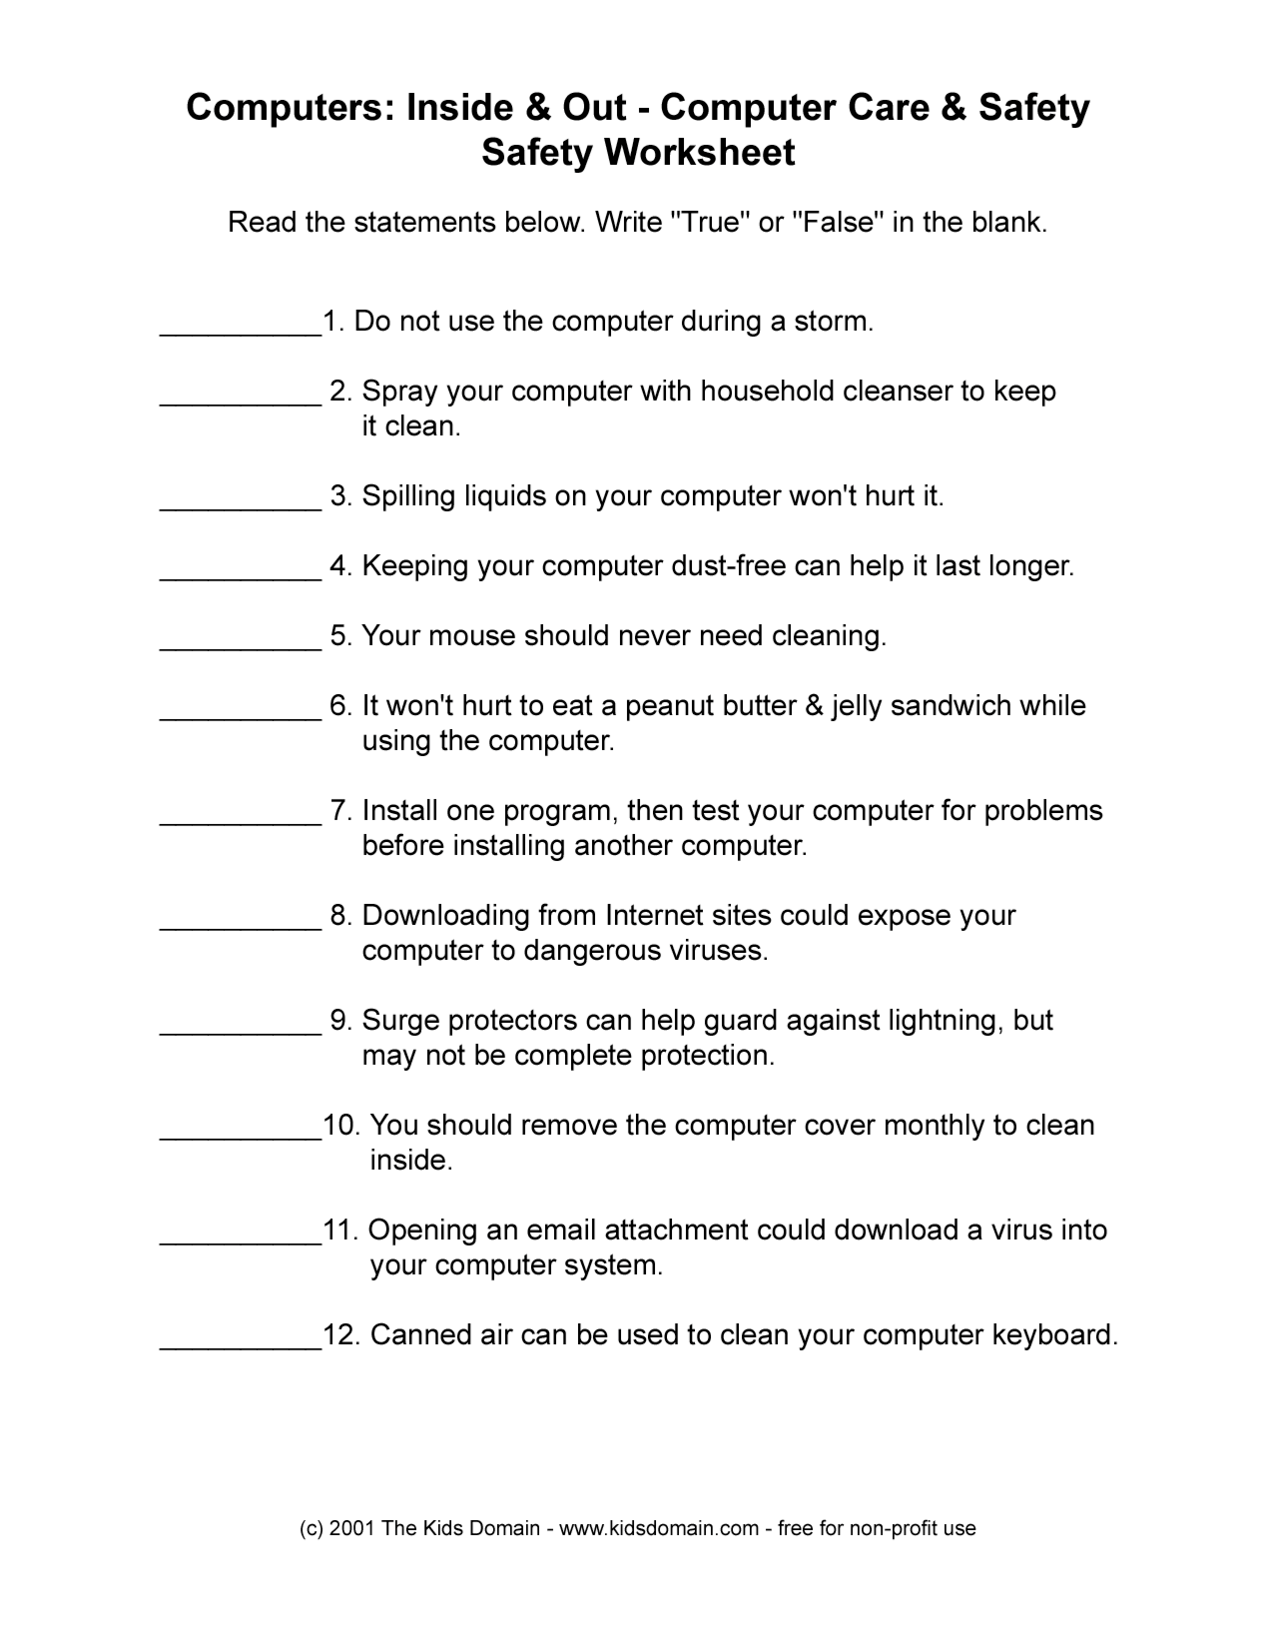 13-best-images-of-health-and-wellness-worksheets-printables-health